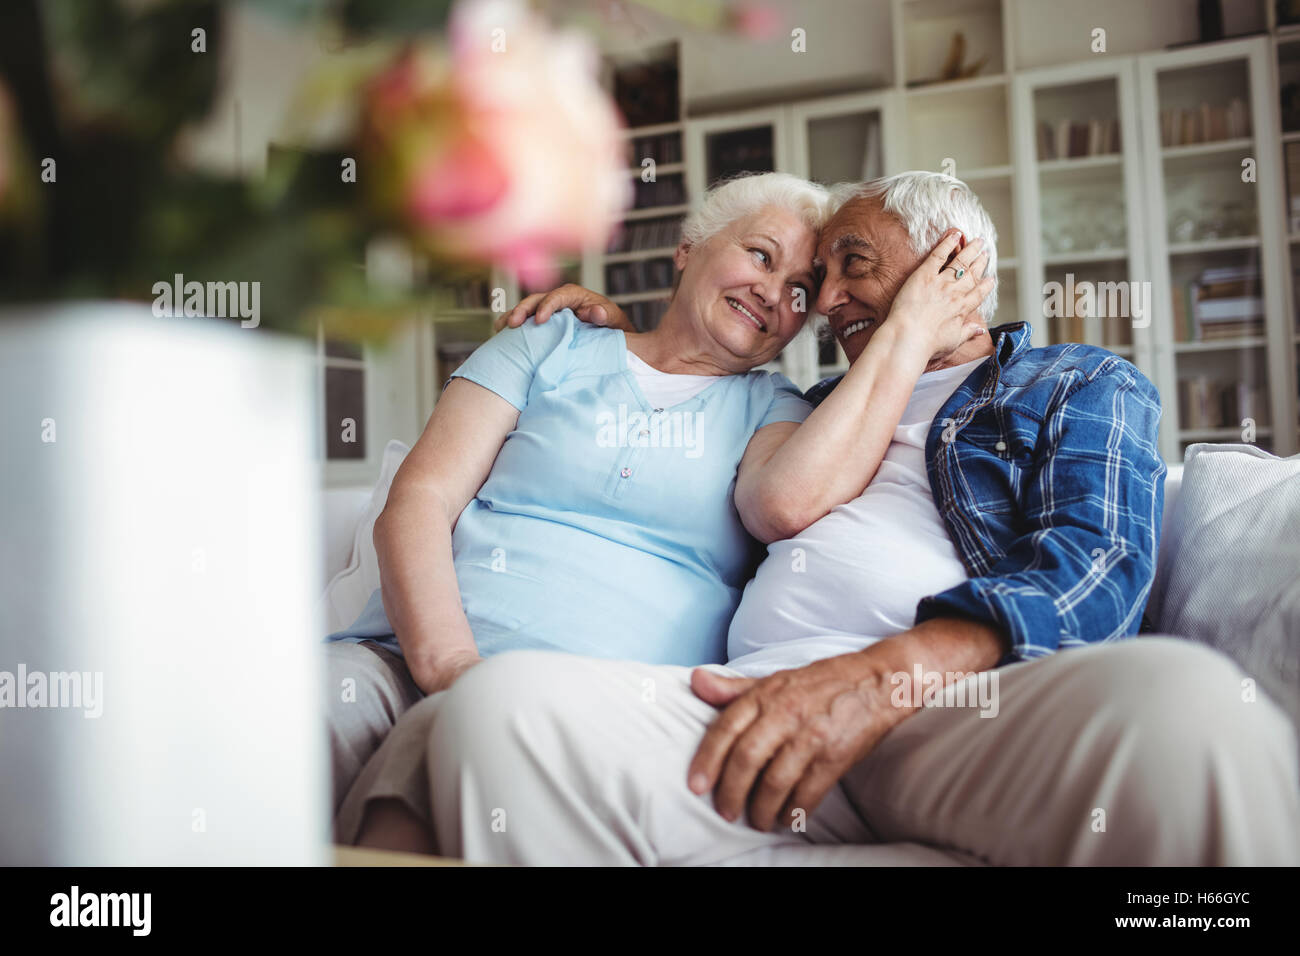 Senior couple relaxing Banque D'Images